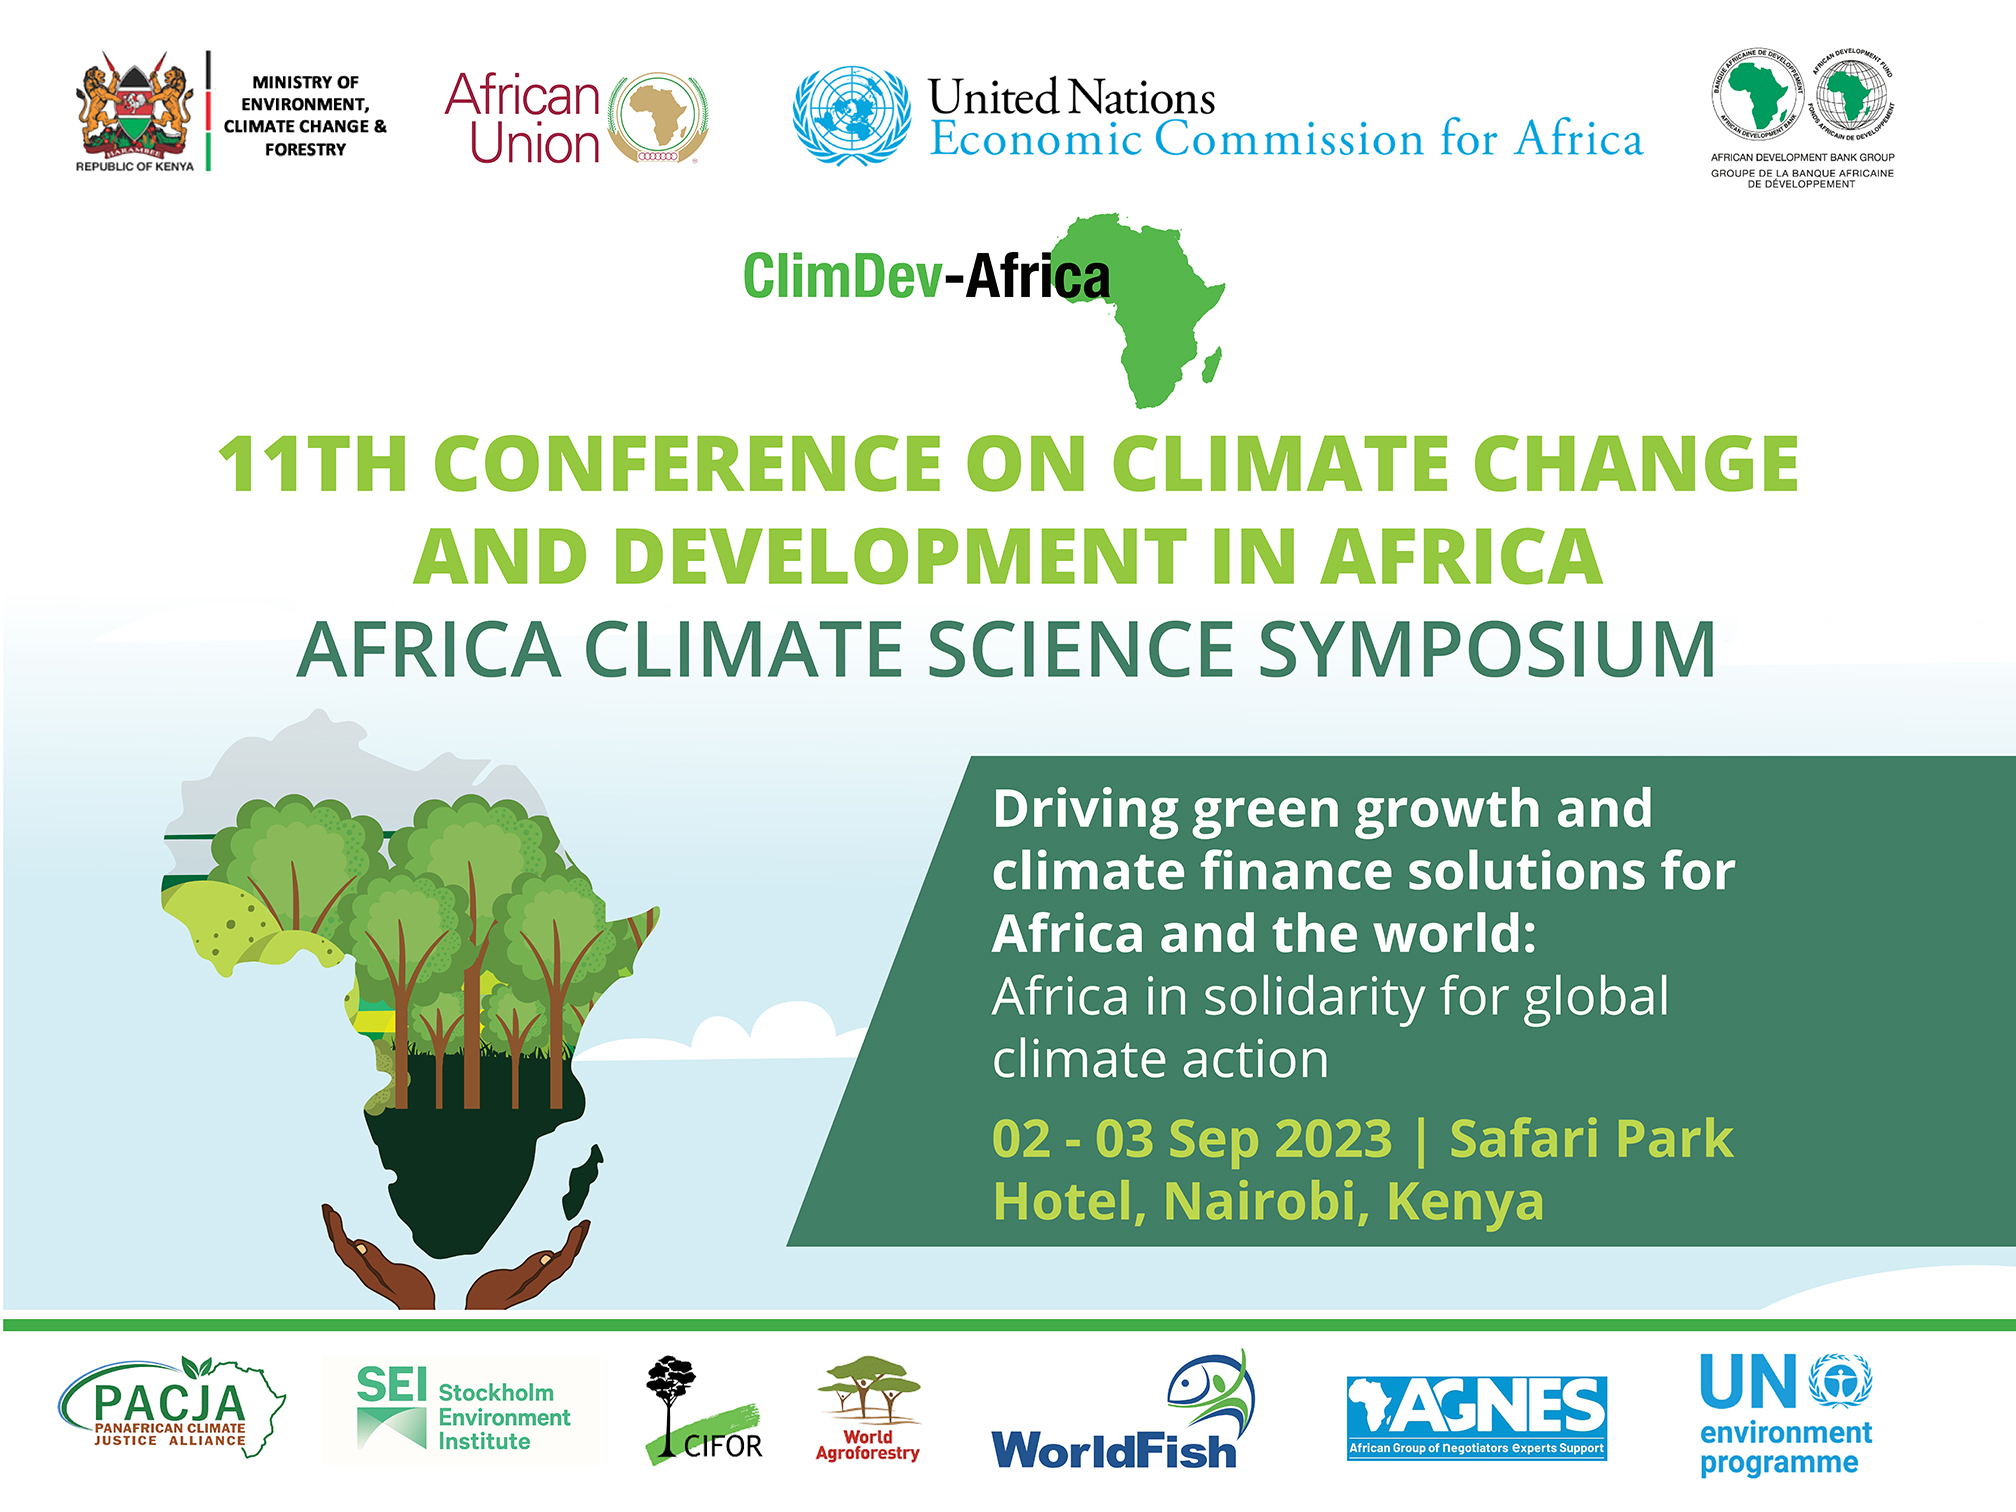 11th Conference on Climate Change and Development in Africa: Africa Climate Science Symposium